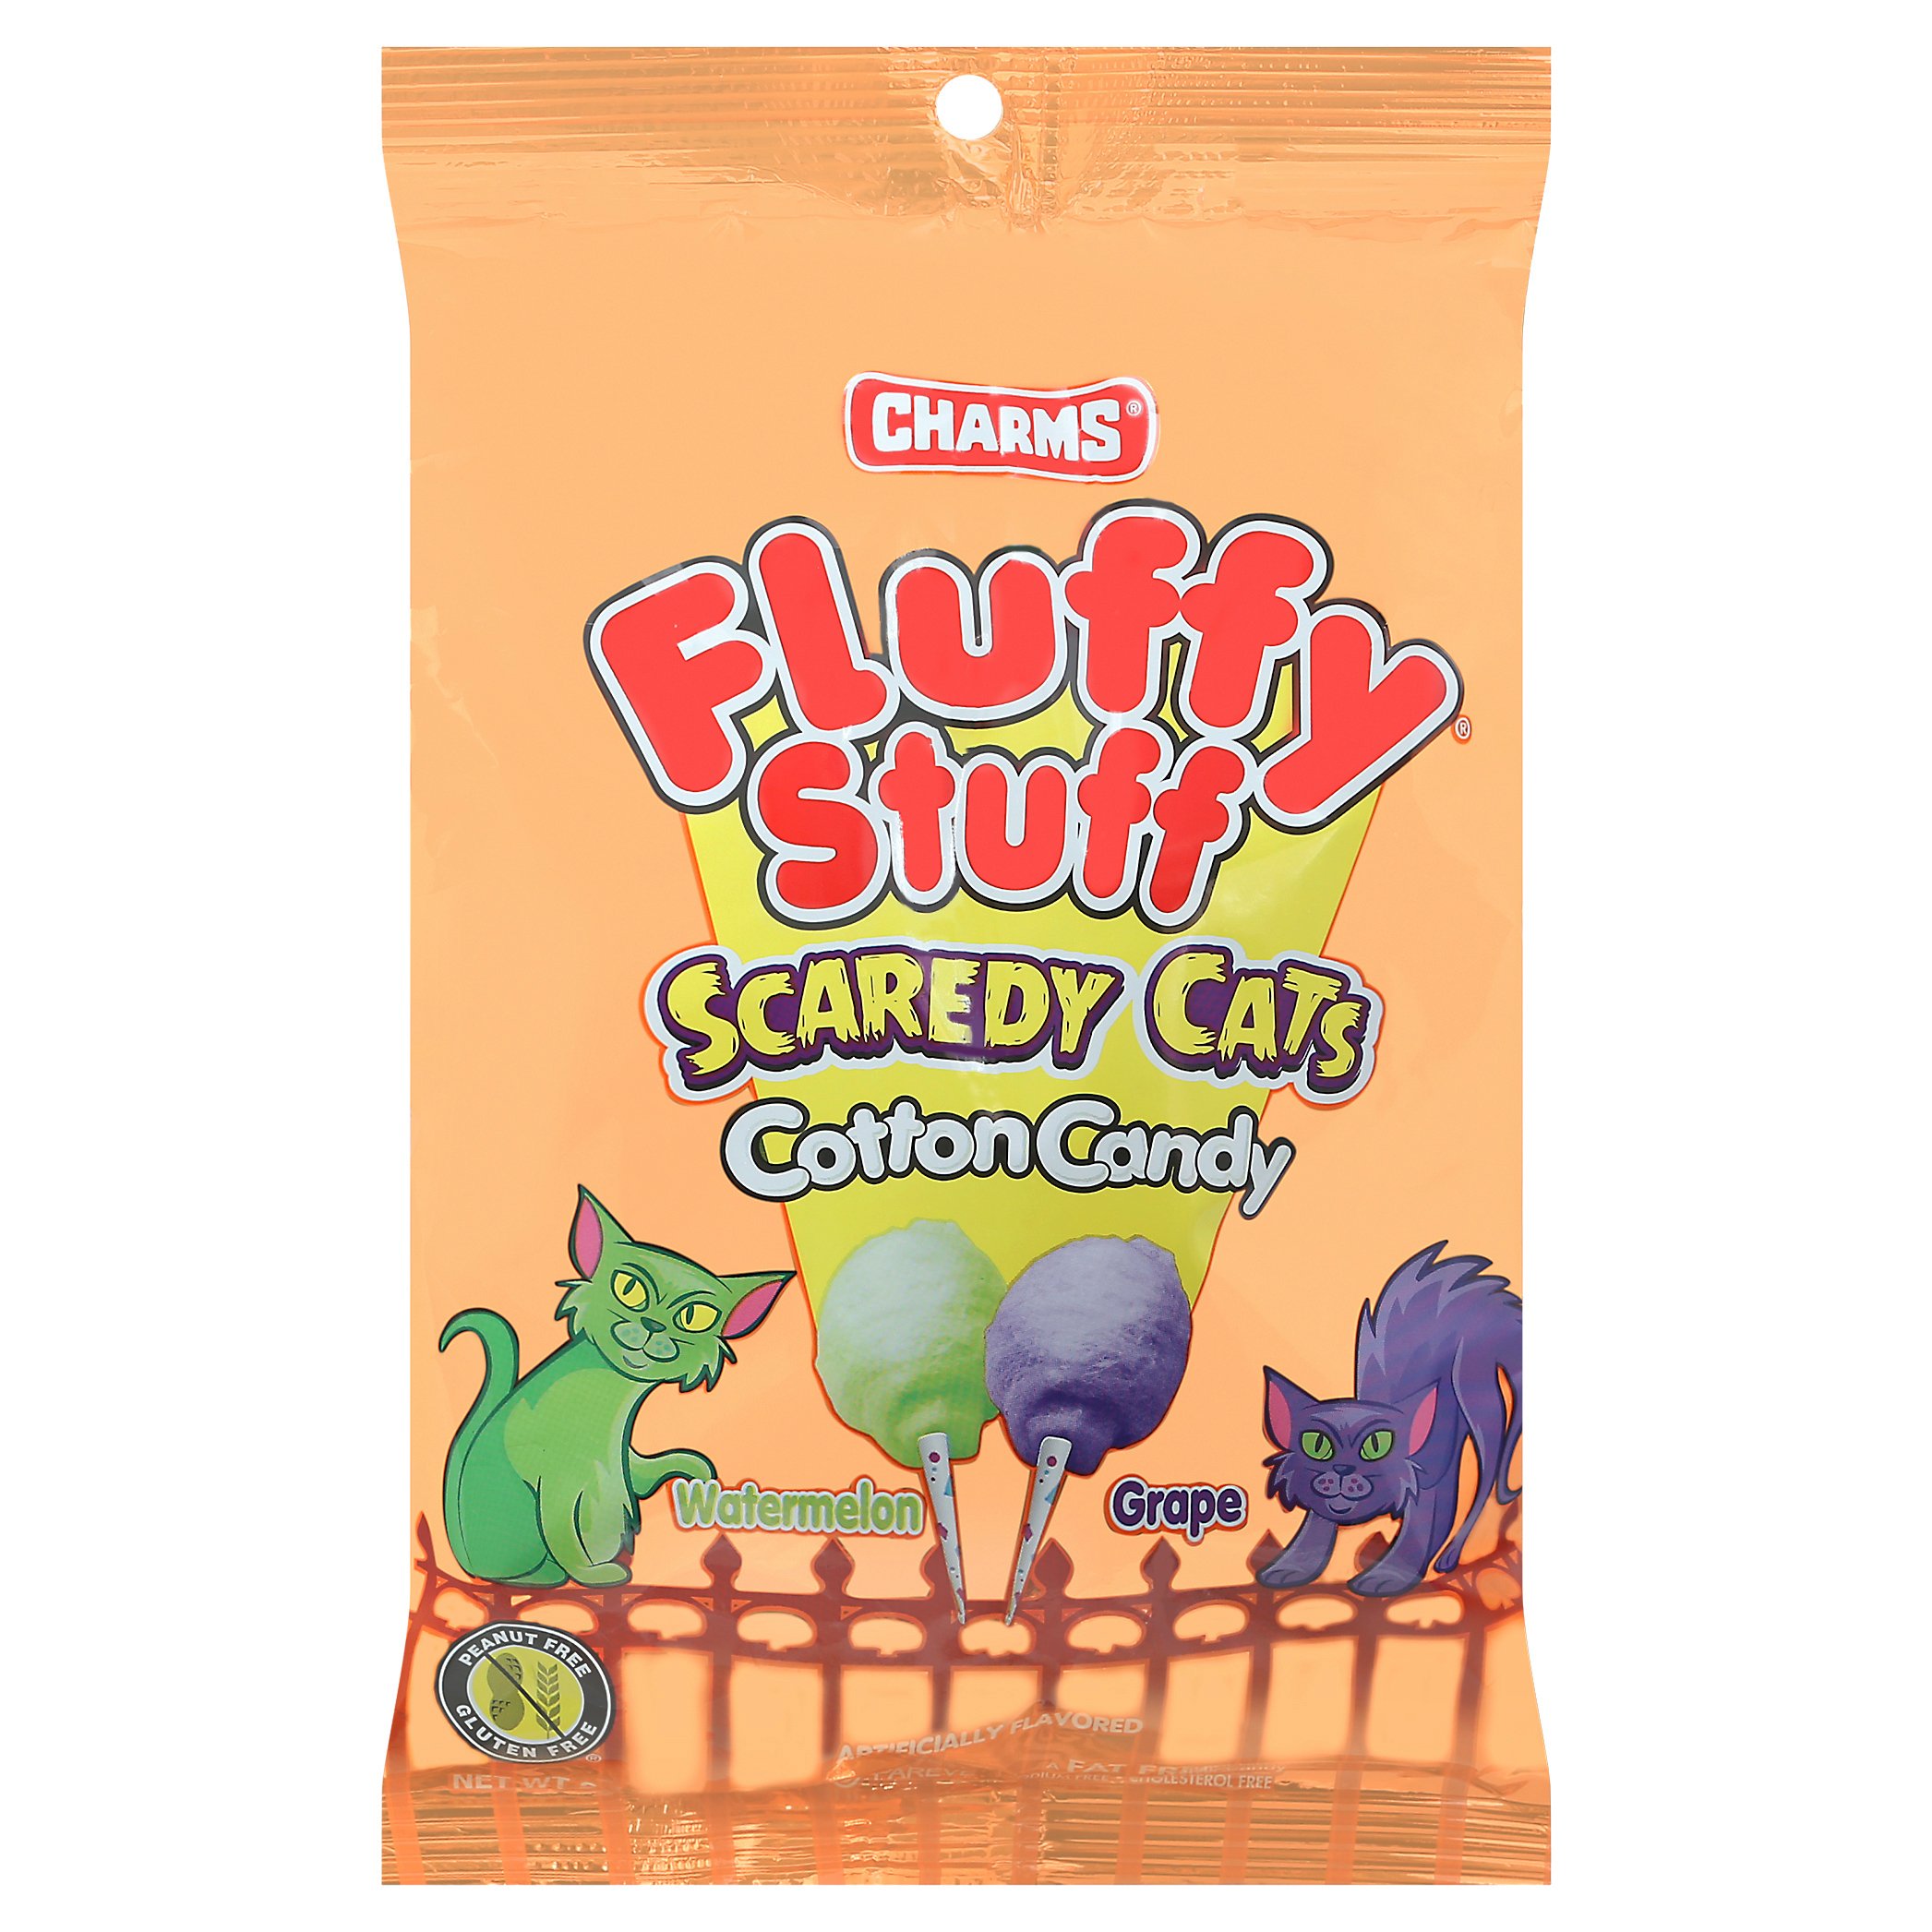 Fluffy Stuff Cotton Candy  Chocolate candy, candy specialty items